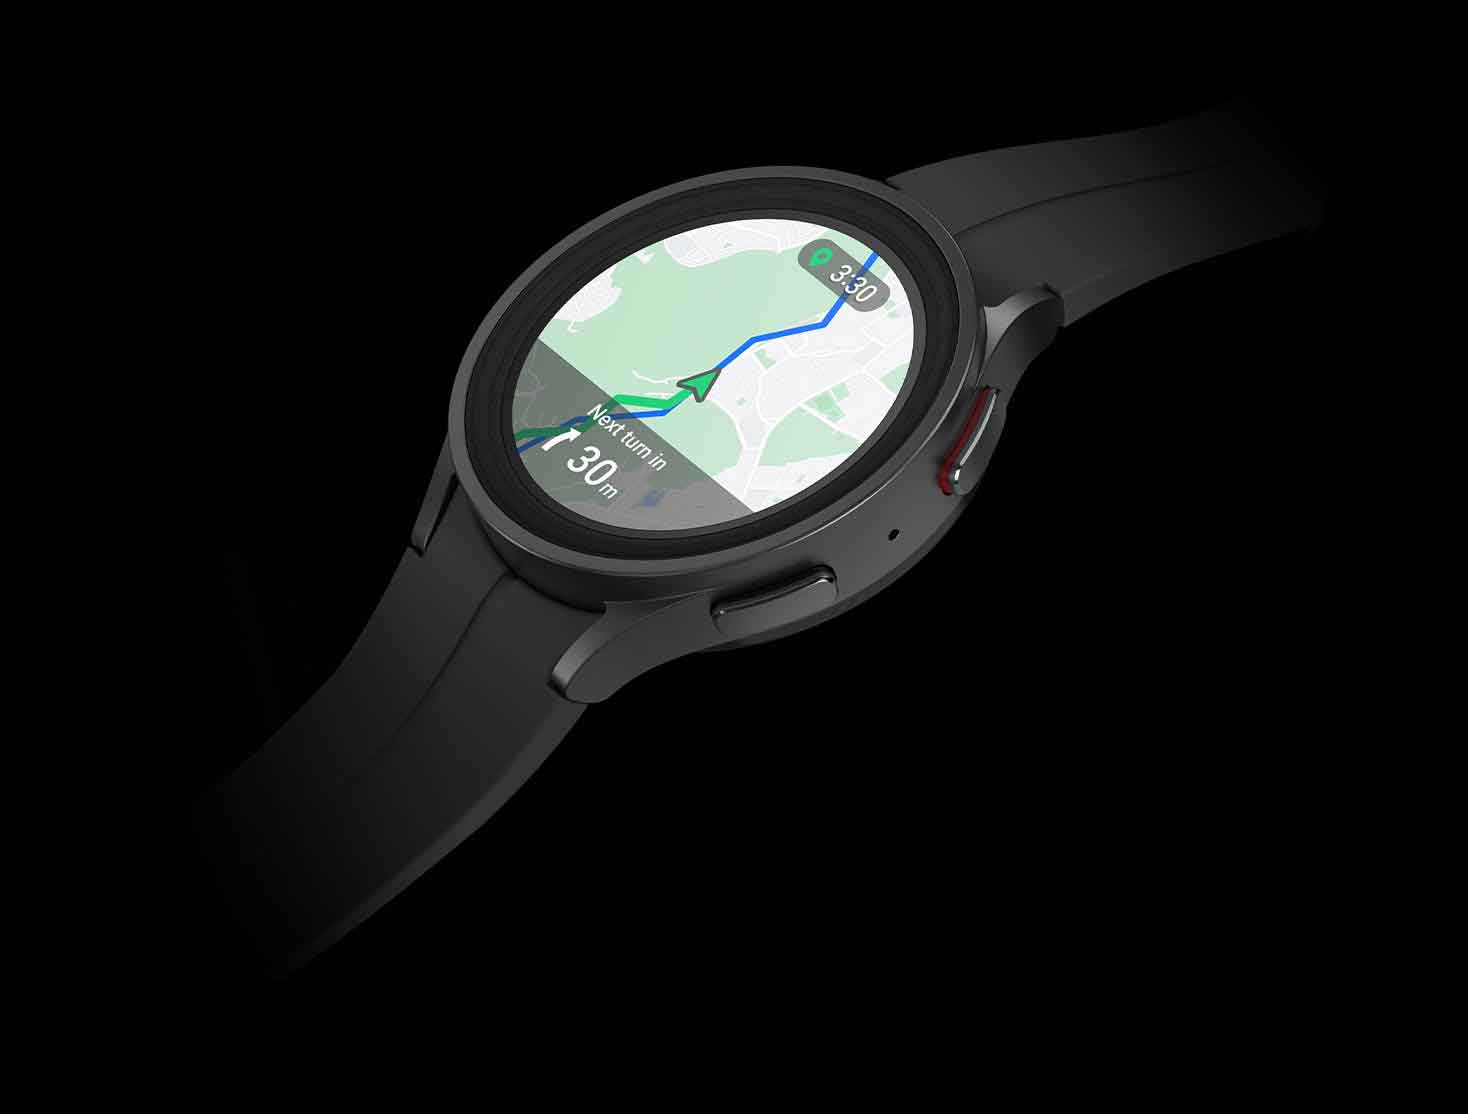 A Titanium Galaxy Watch5 Pro in black showing a map on the watch face featuring turn-by-turn …